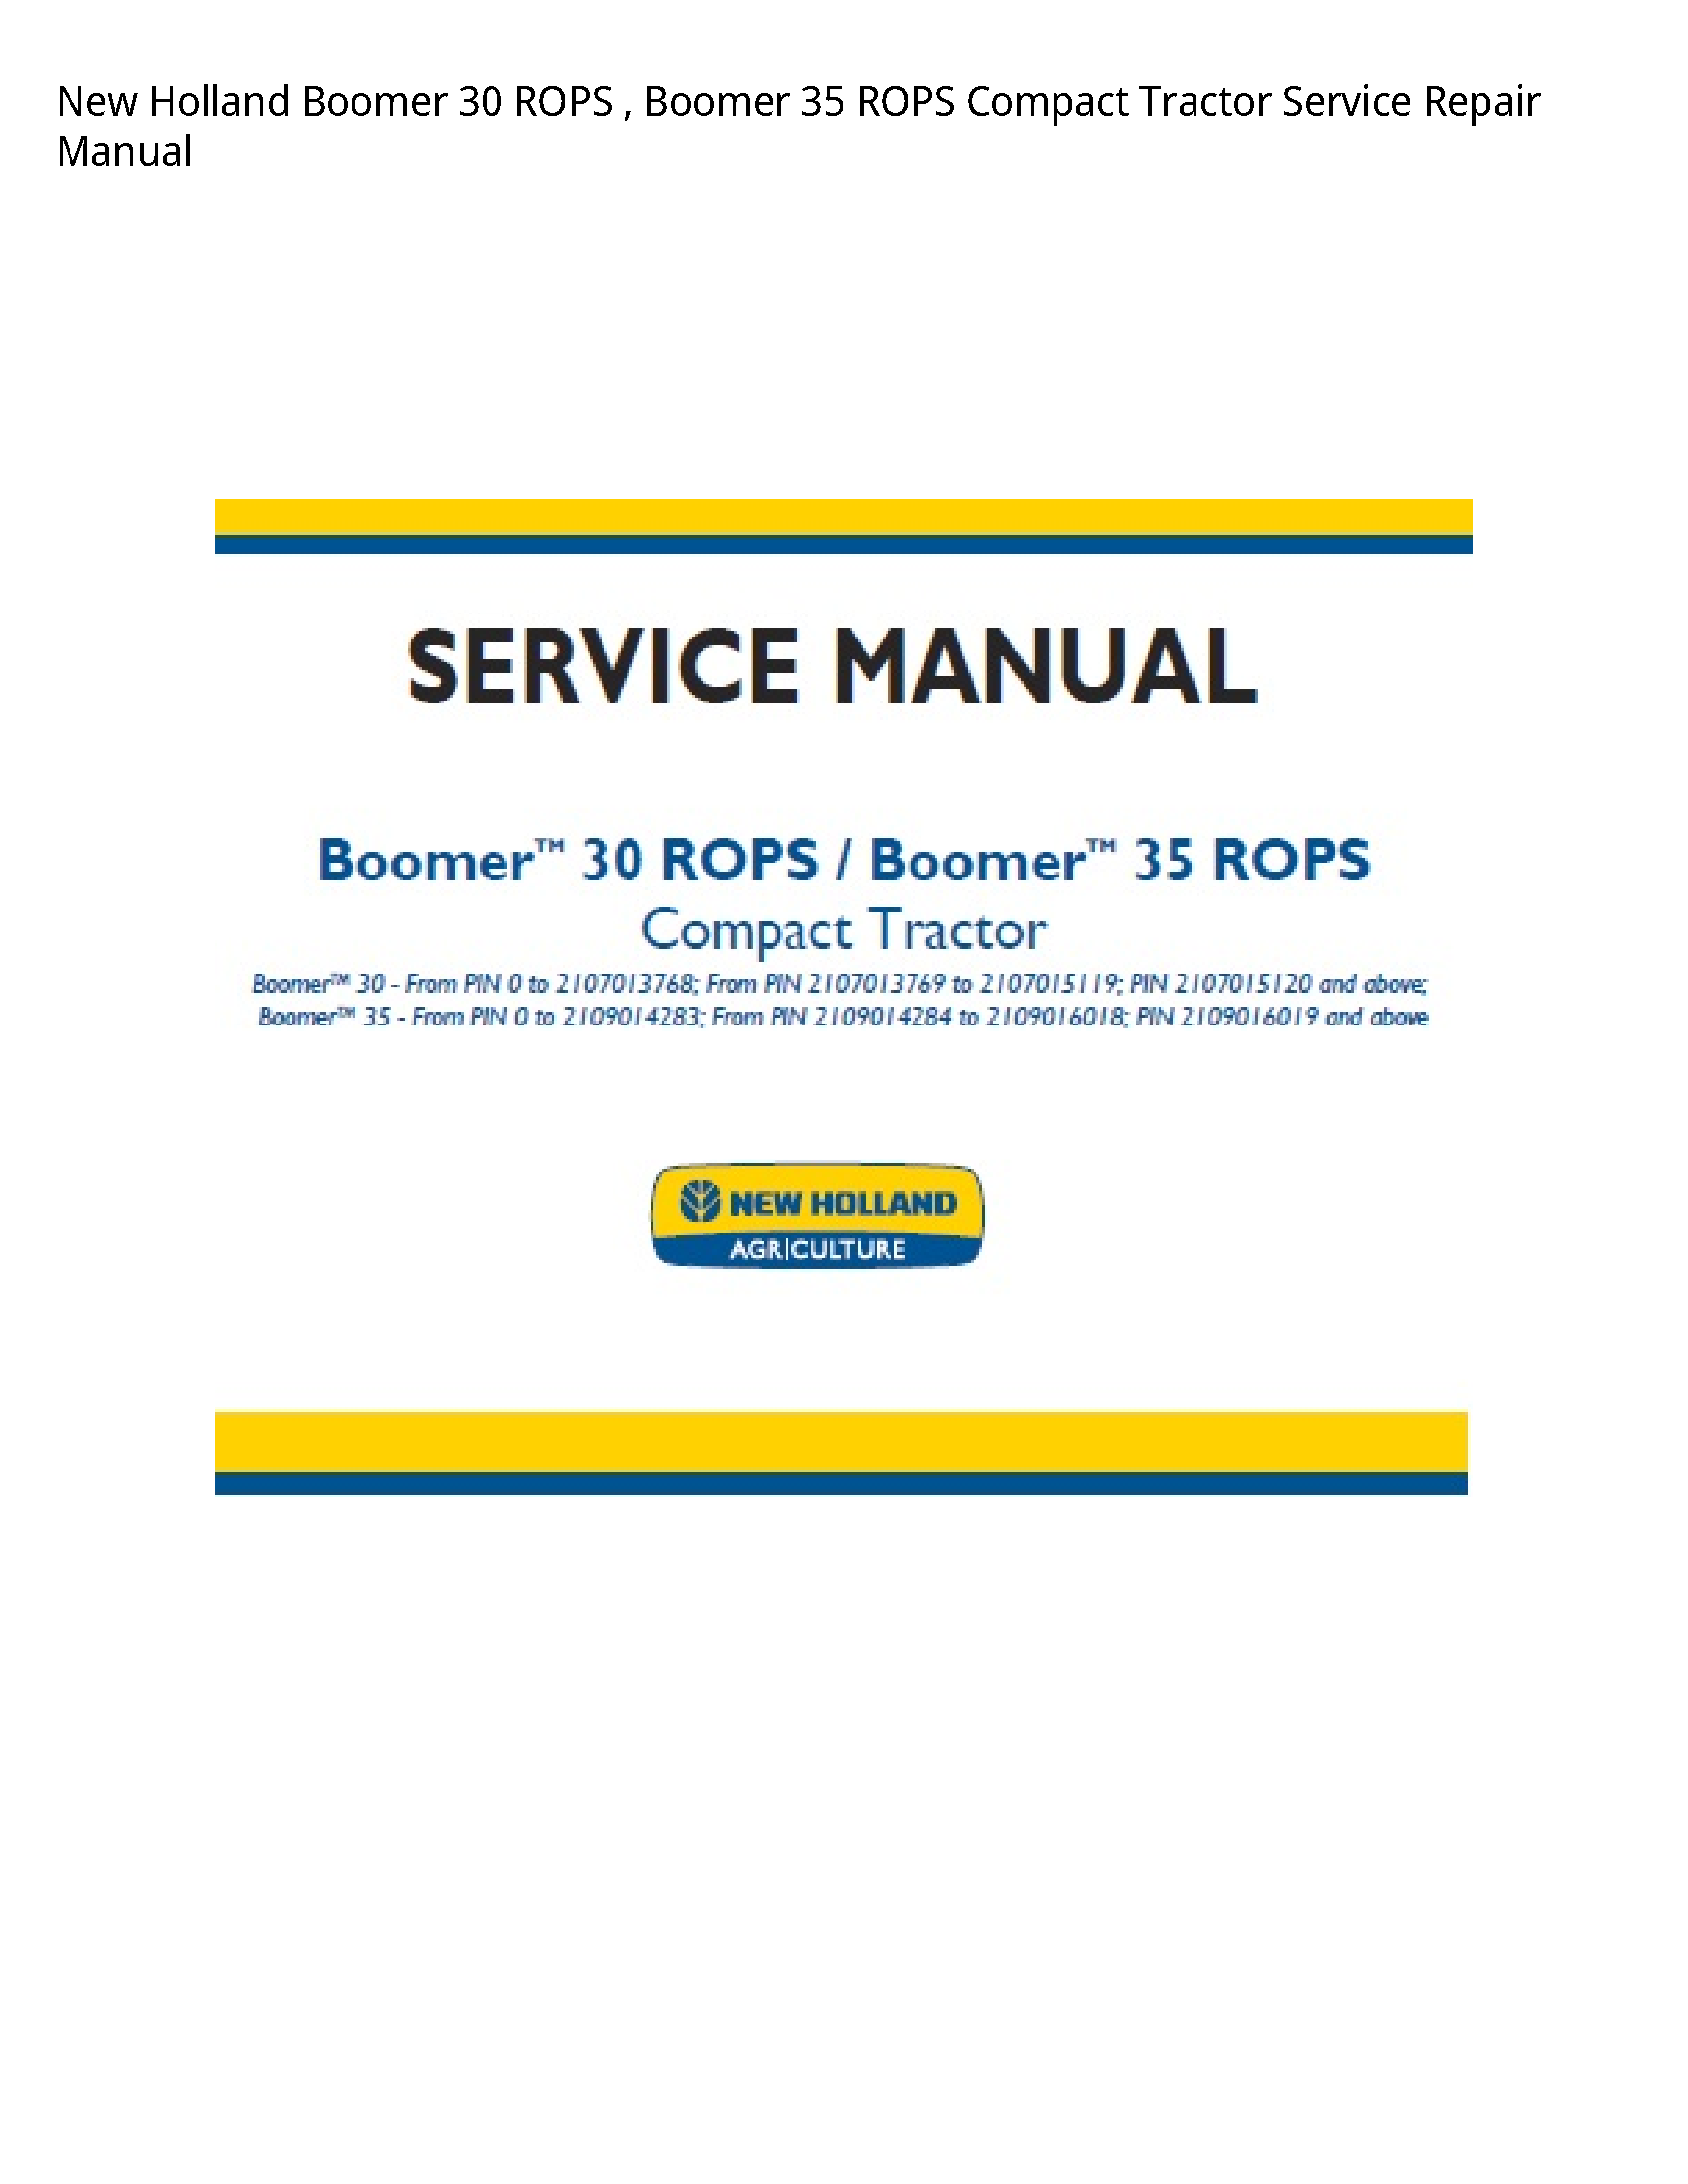 New Holland 30 Boomer ROPS Boomer ROPS Compact Tractor manual